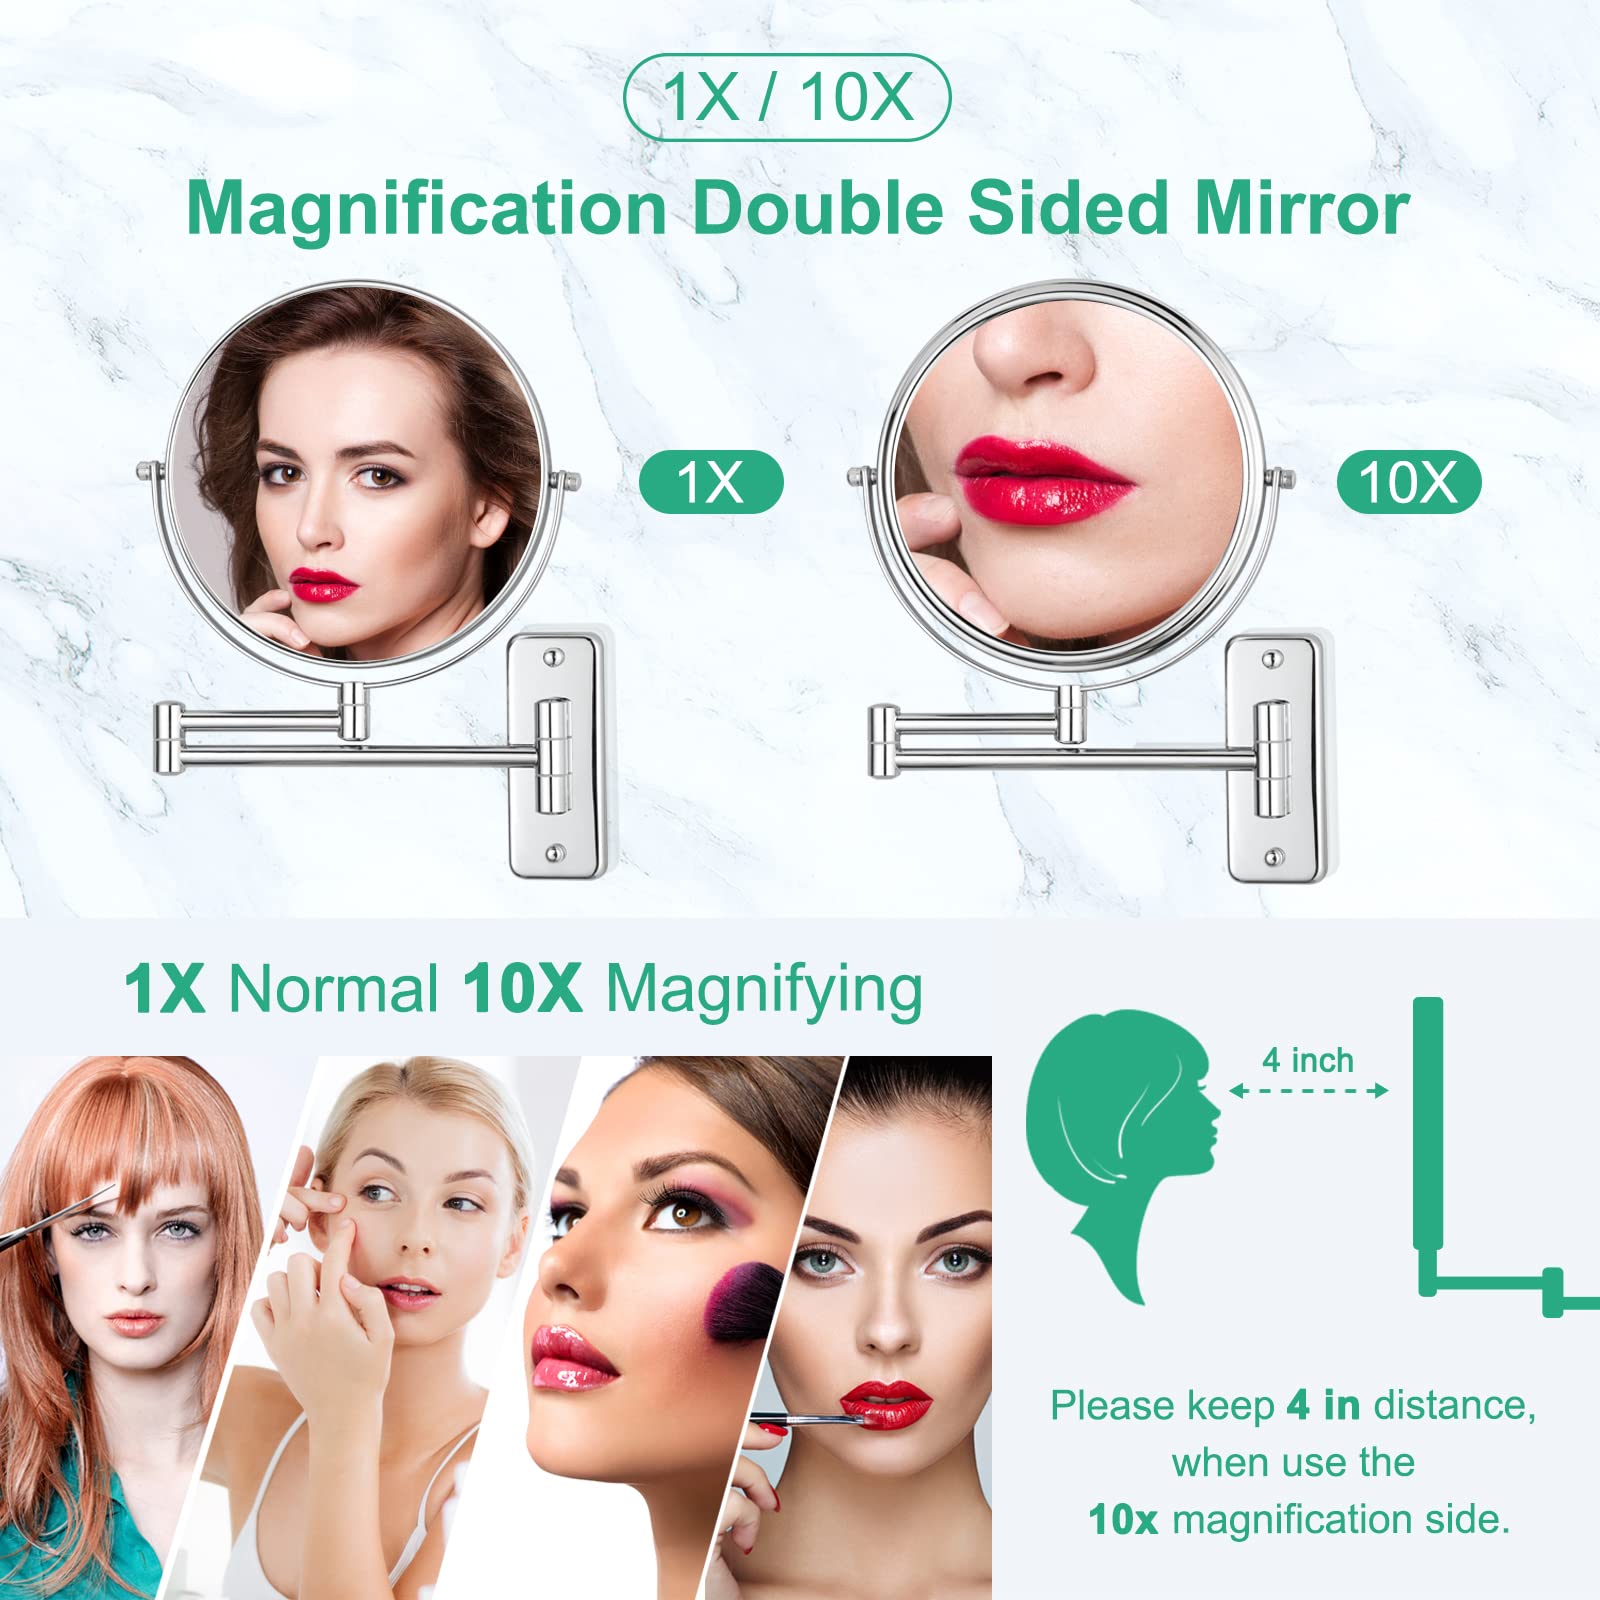 DECLUTTR 8 Inch Wall Mounted Magnifying Mirror with 10x Magnification, Double Sided Vanity Makeup Mirror for Bathroom, Chrome Finished